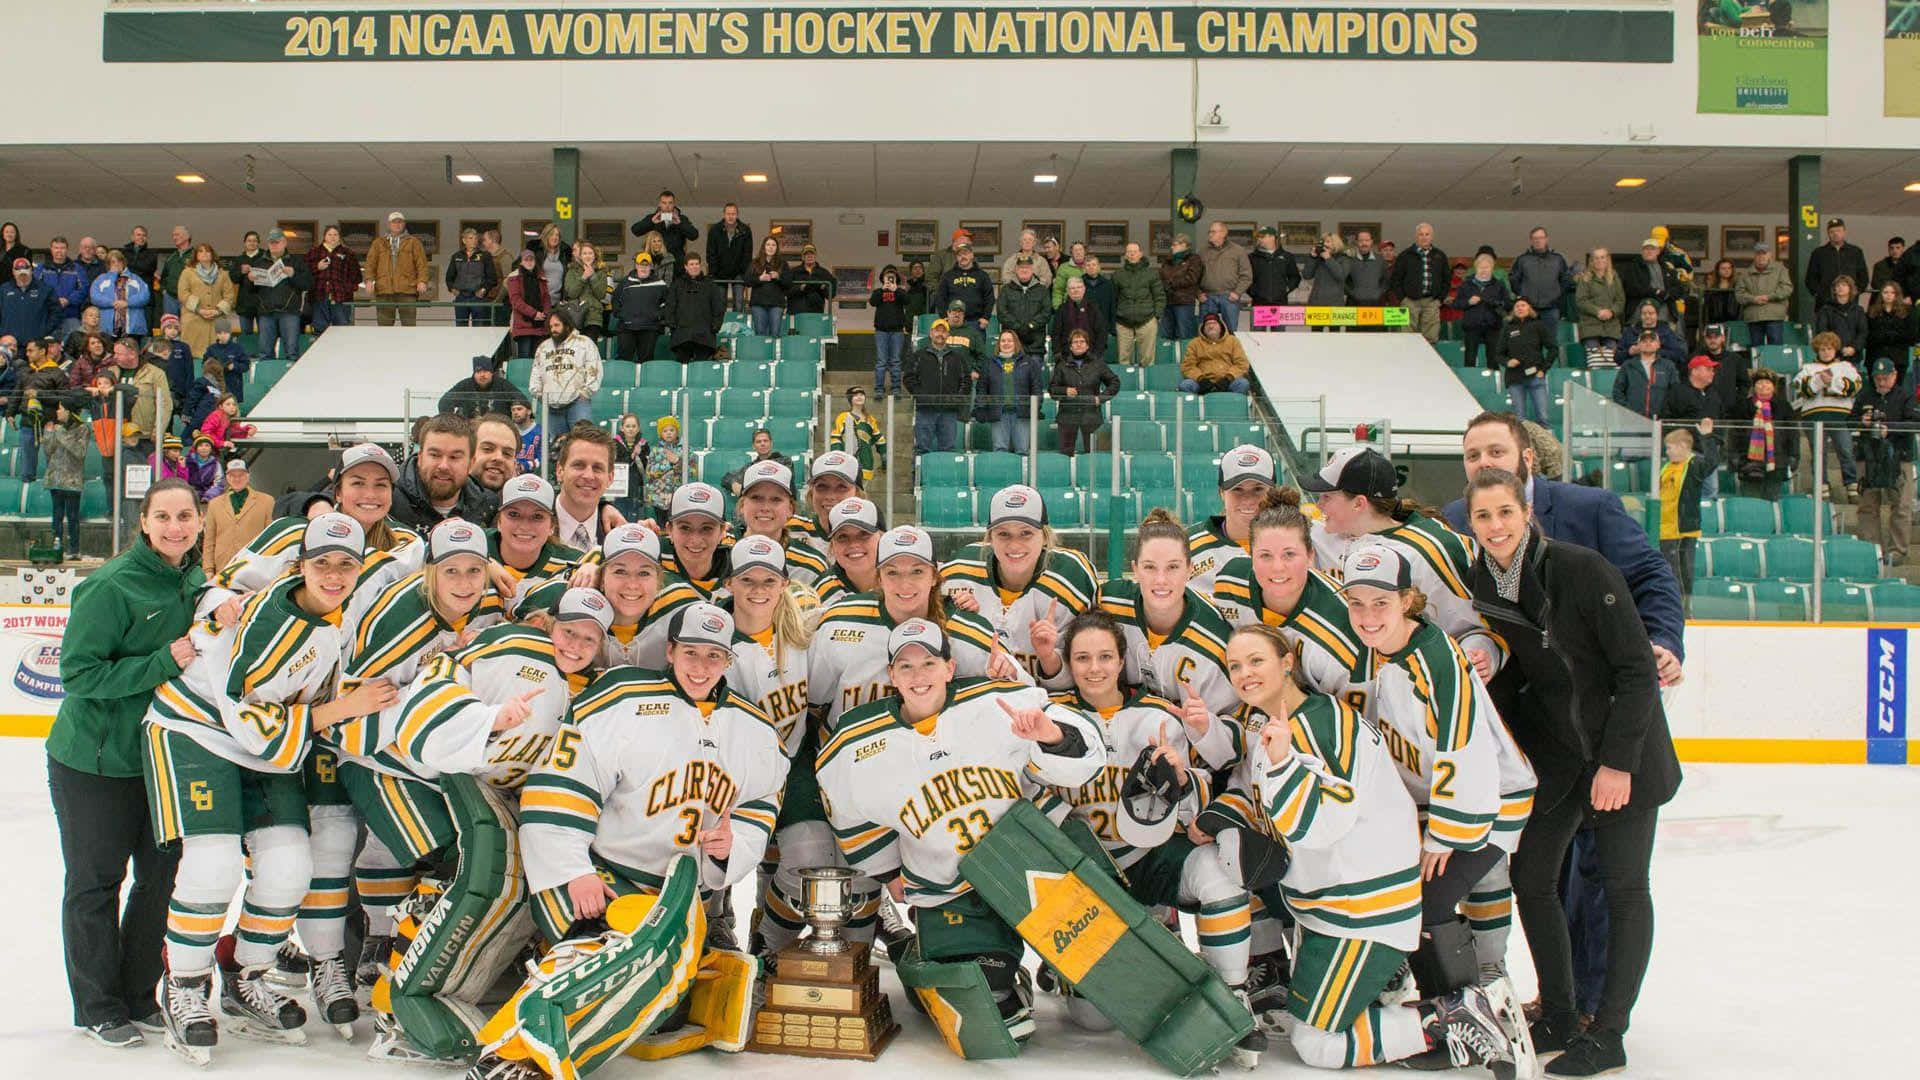 A Group Of Women Hockey Players Pose With Their Trophy